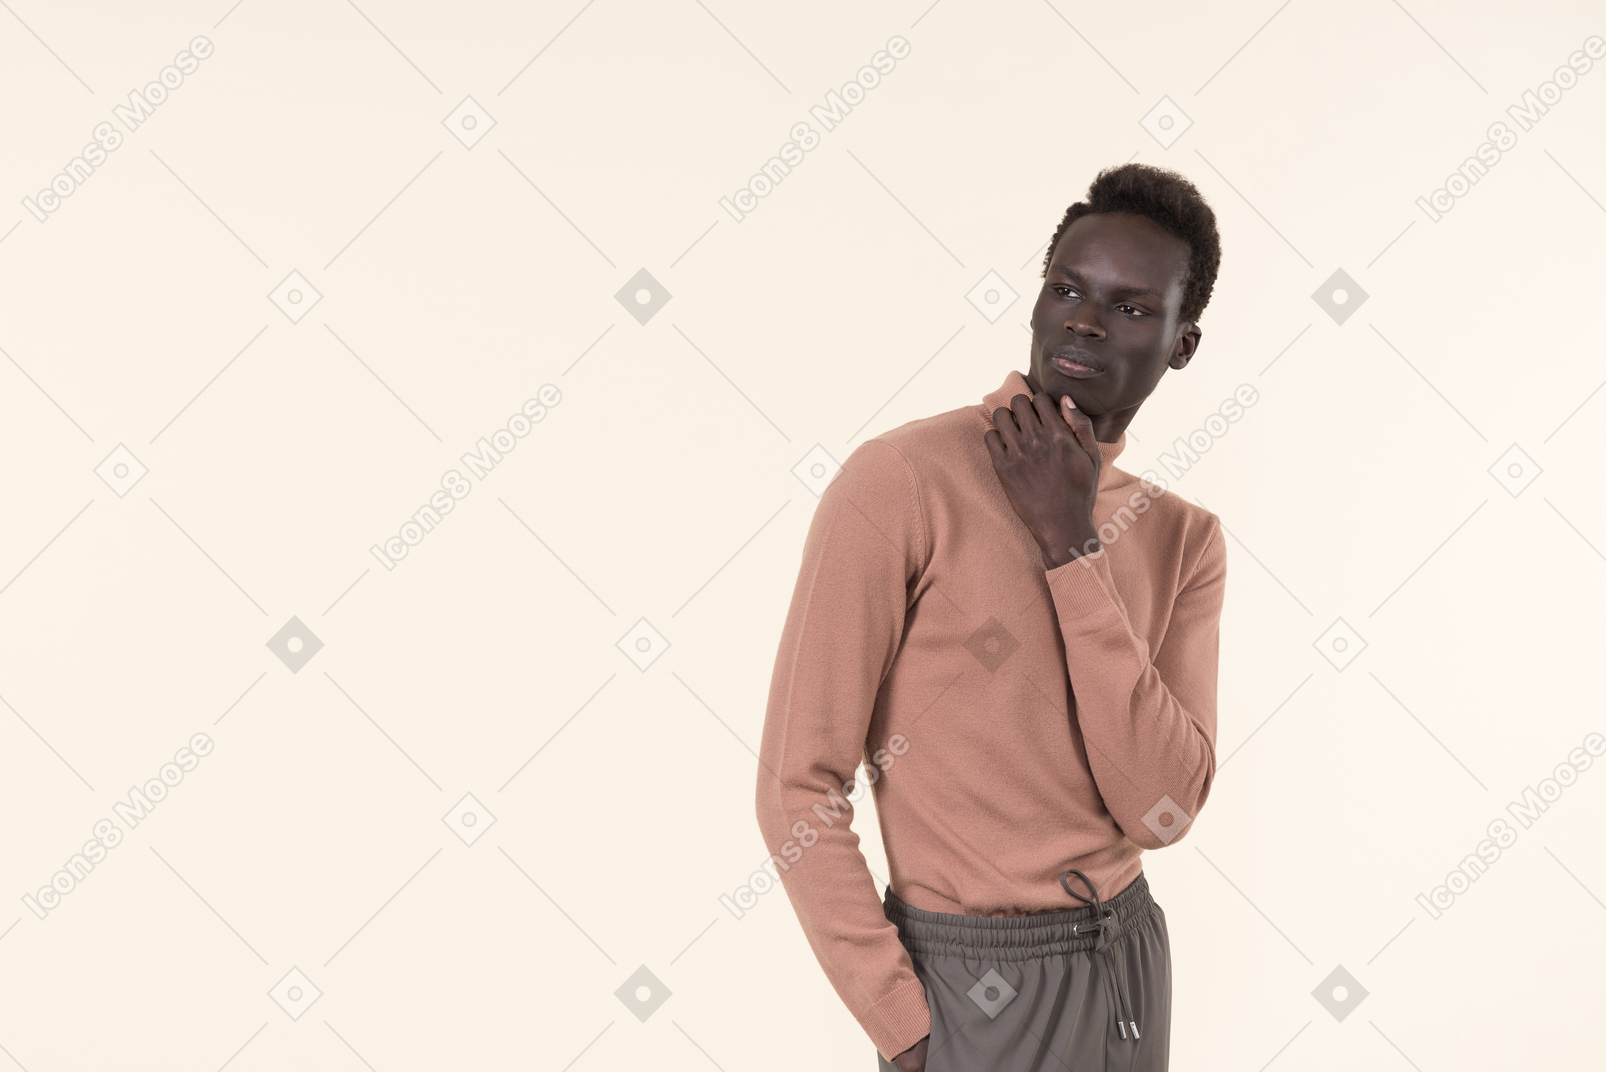 A young black man in a beige turtleneck and grey sweatpants standing casually on the white background